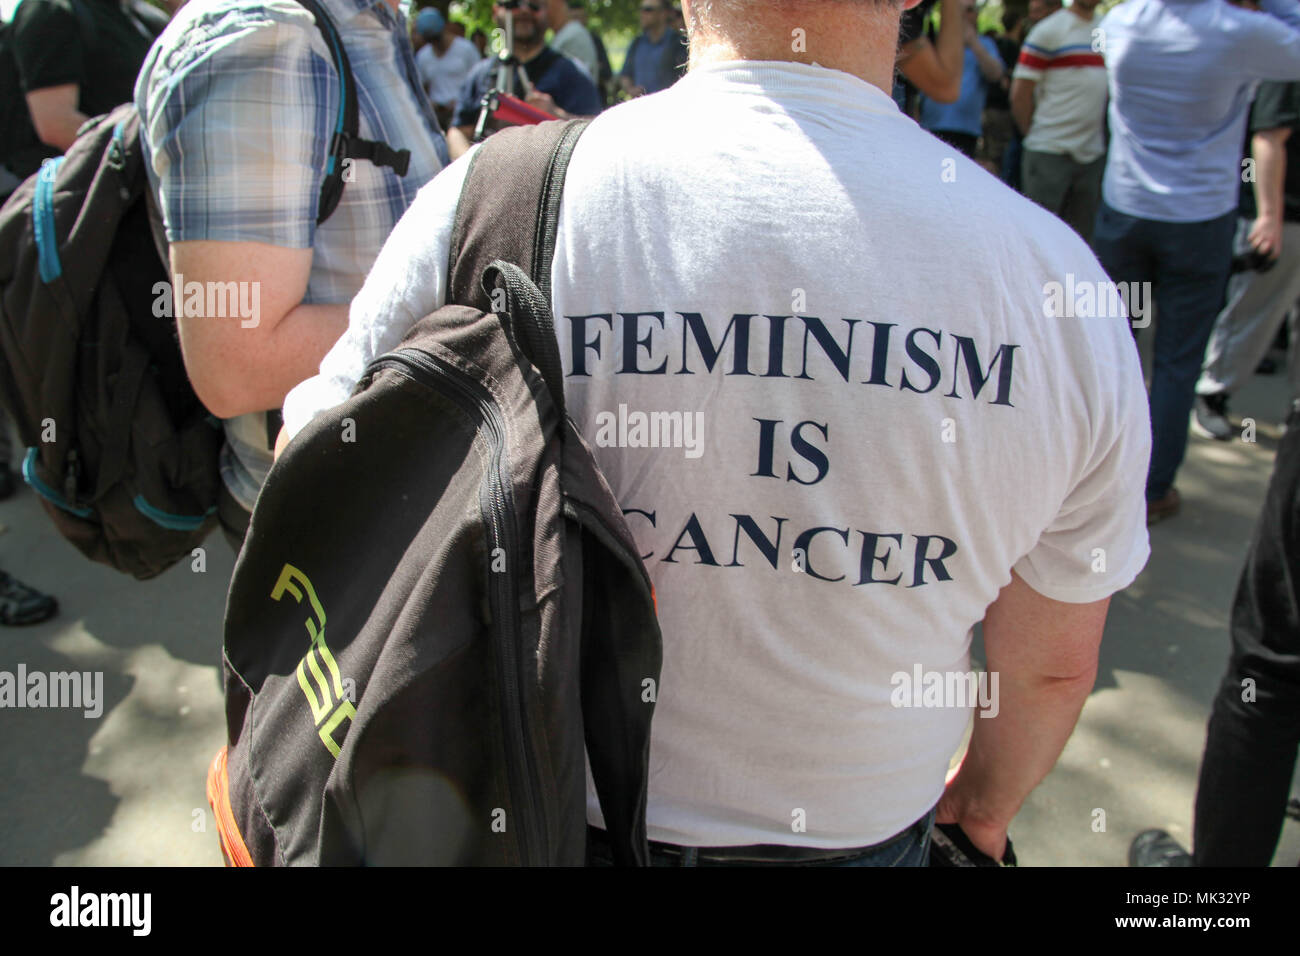 London, UK. 6th May 2018. Shirt of one of the en during the Day for Freedom Credit: Alex Cavendish/Alamy Live News Stock Photo